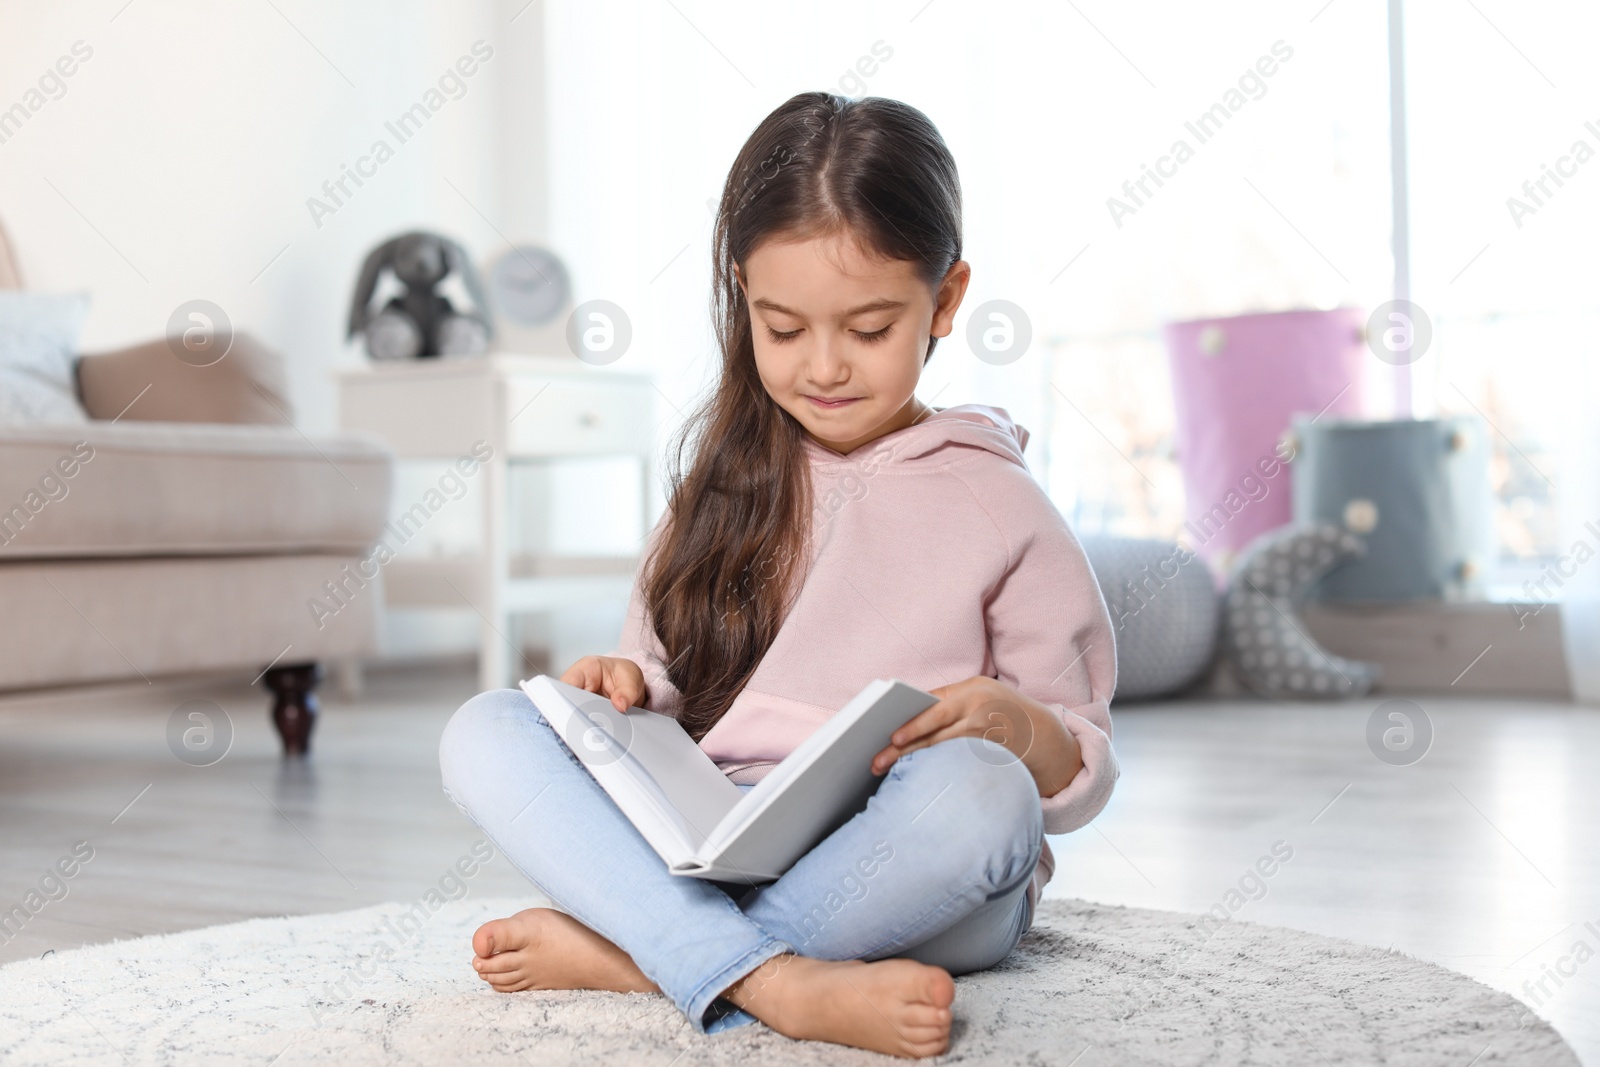 Photo of Cute child reading book on floor indoors